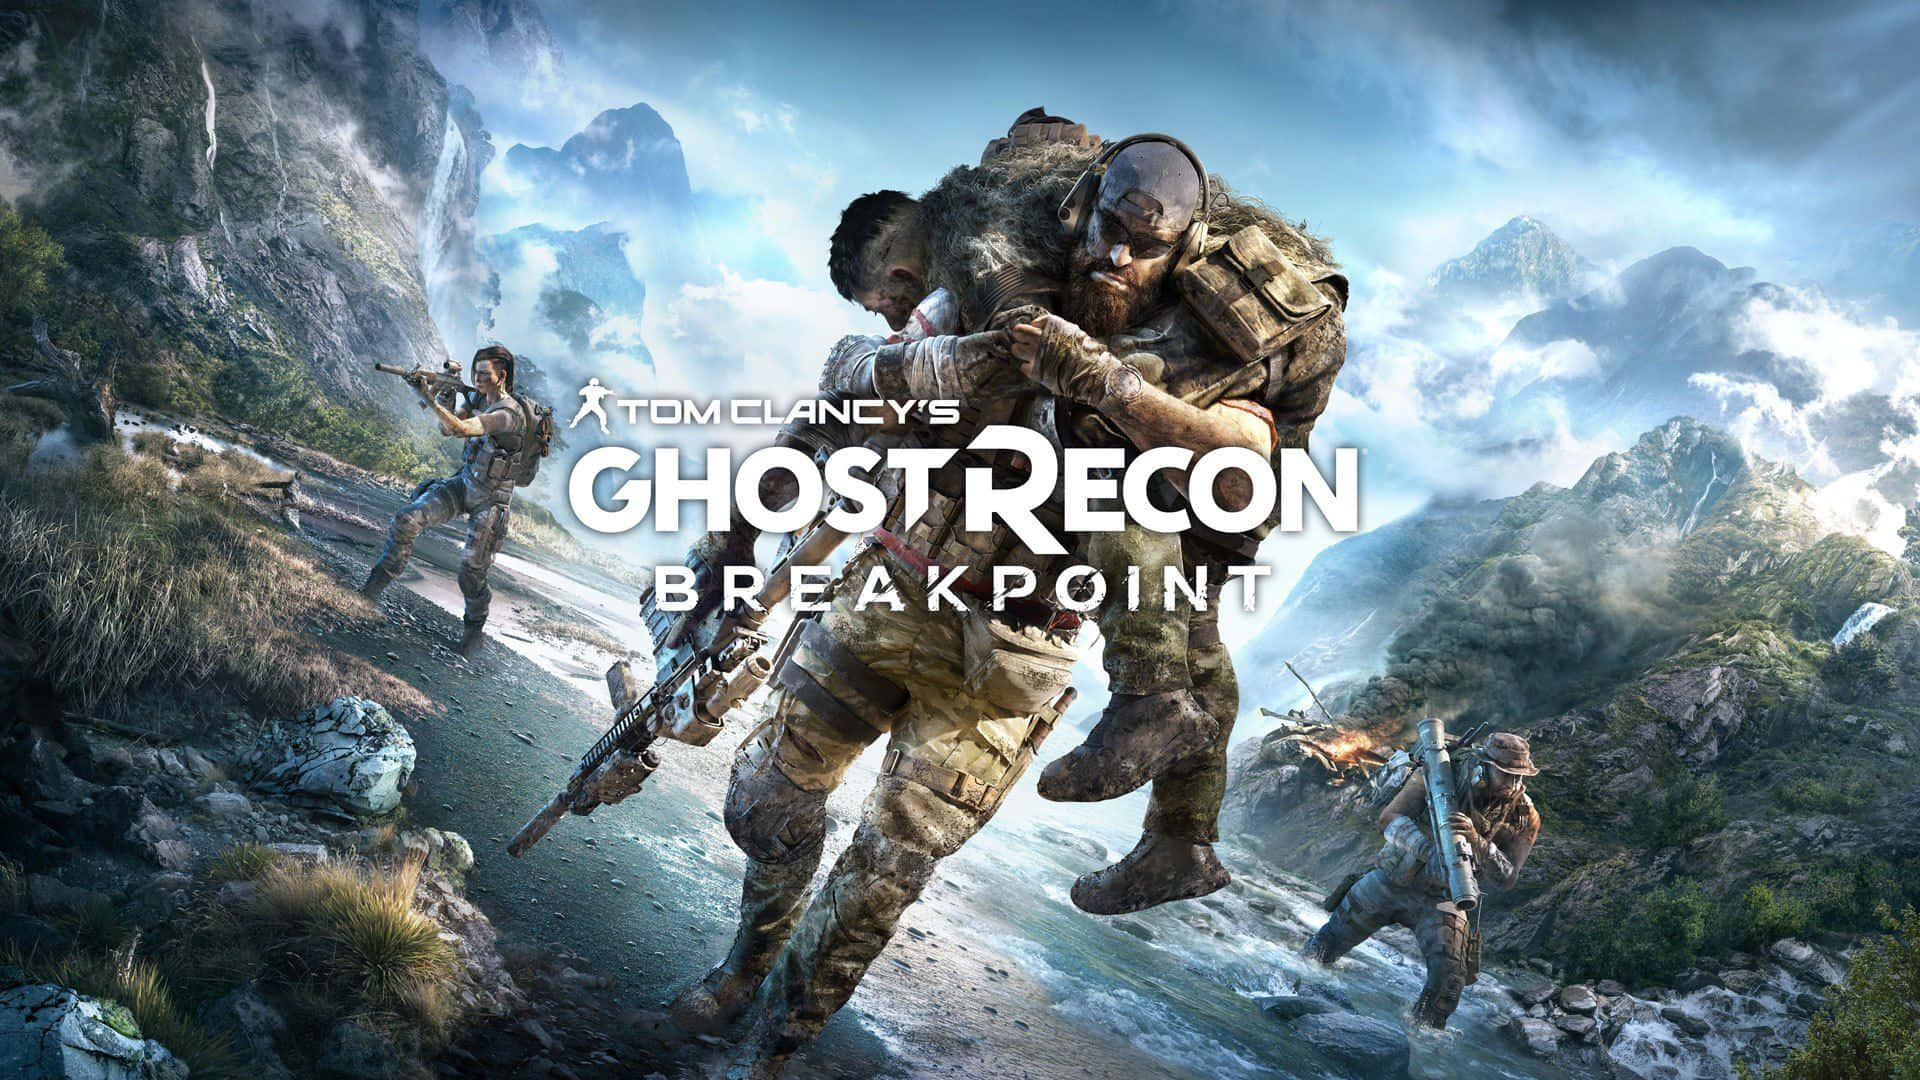 Ghostrecon Breakpoint